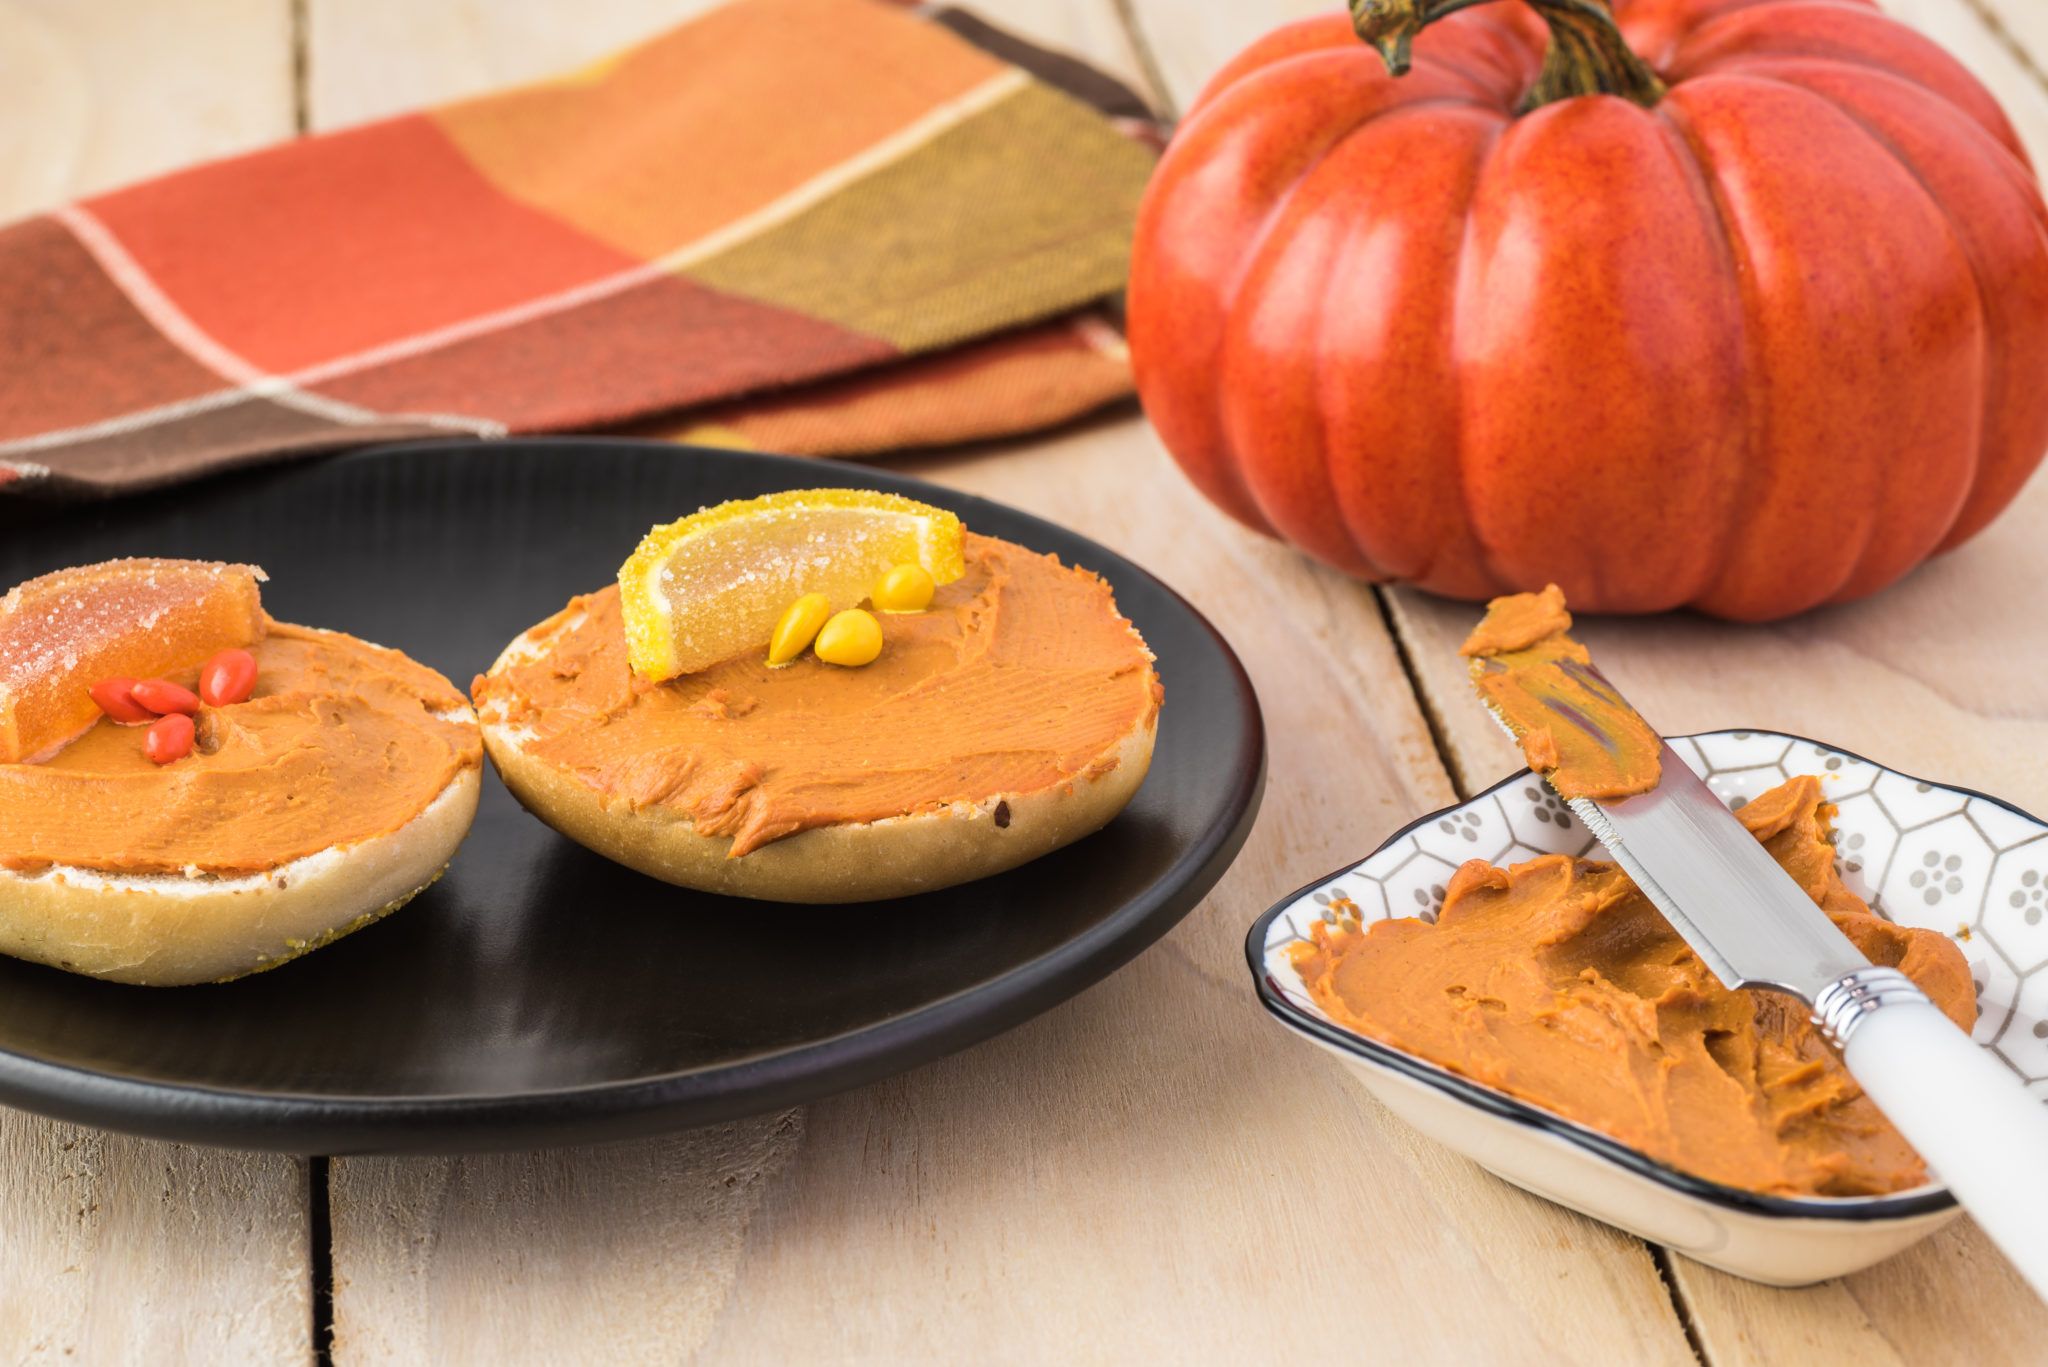 Pumpkin spice bagels are a thing, and we’re intrigued